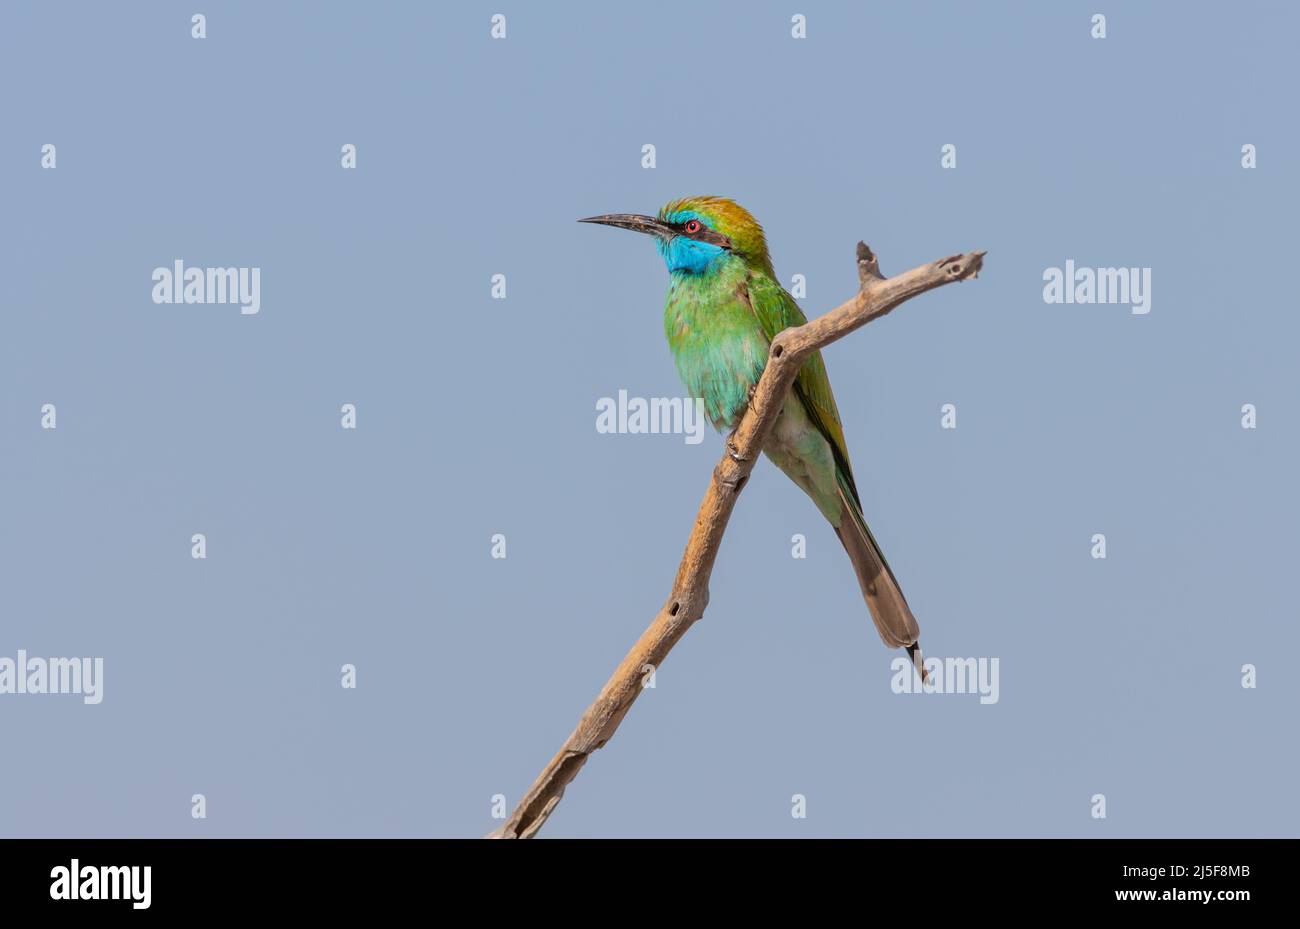 An Arabian green bee-eater (Merops cyanophrys) in the Al Wasit Wetland Nature Reserve in Sharjah in the United Arab Emirates. Stock Photo